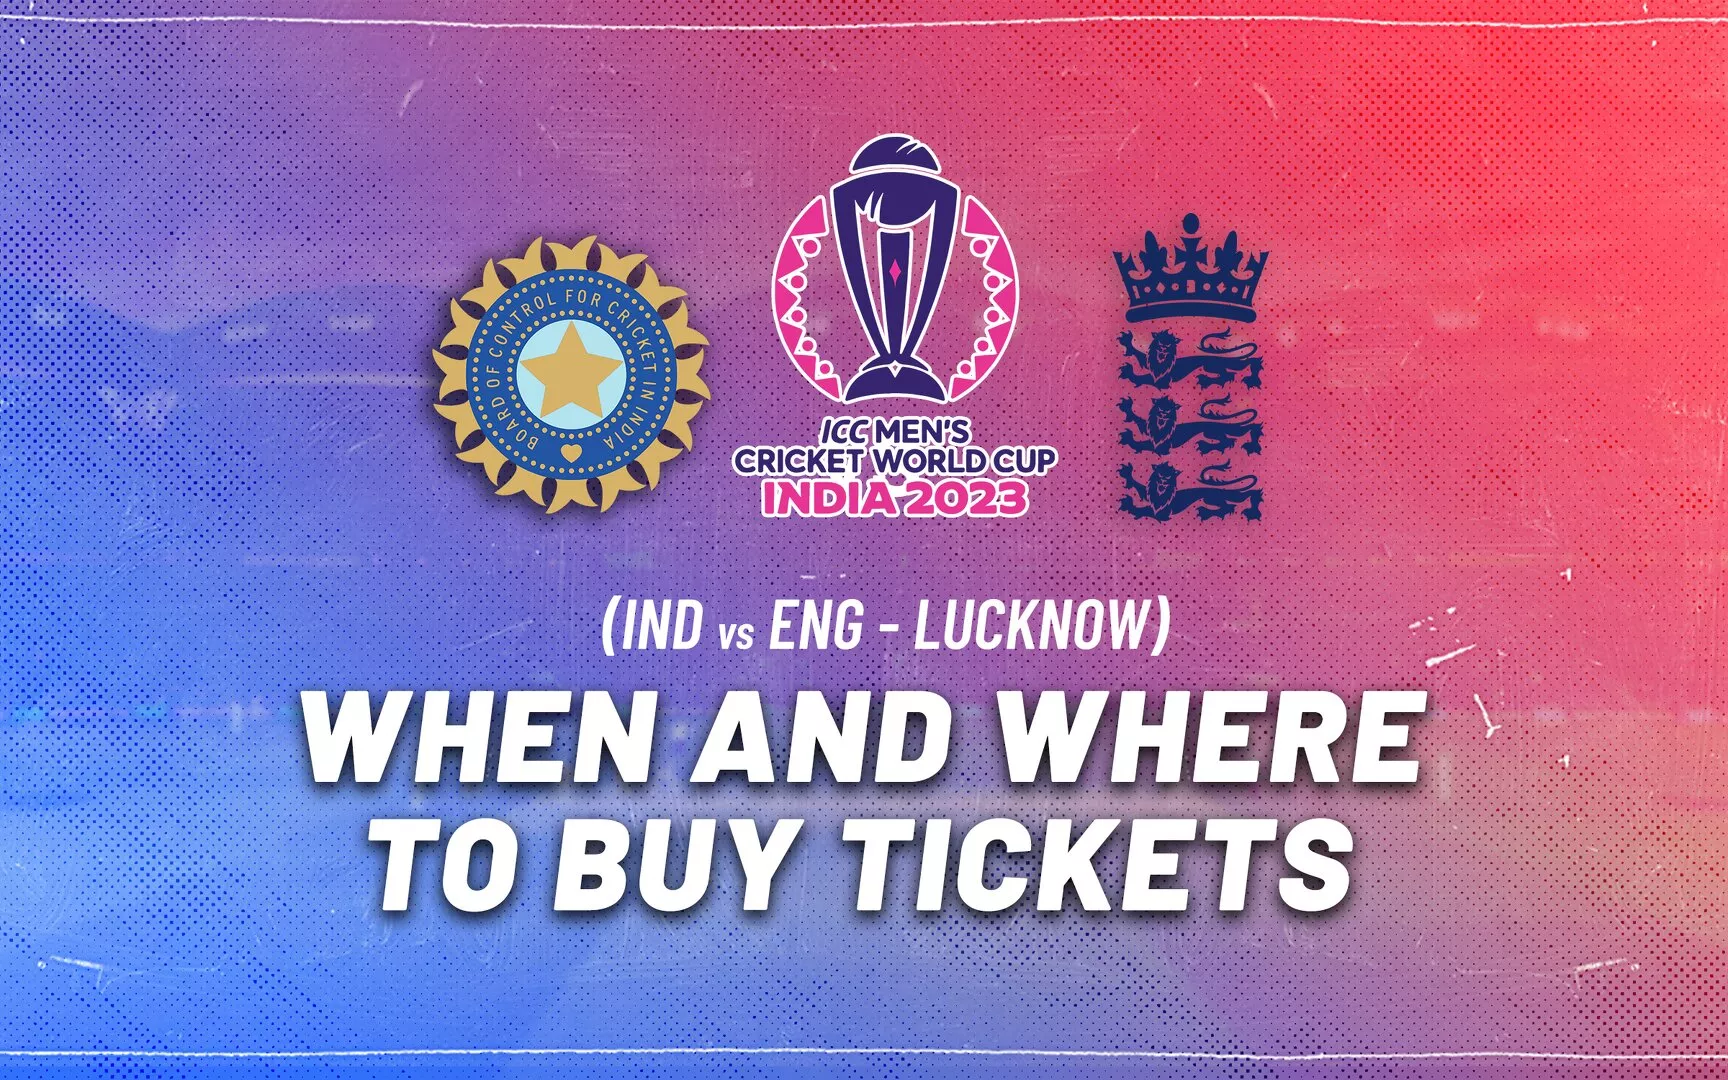 When and where to buy India vs England tickets for ICC Cricket World Cup 2023?